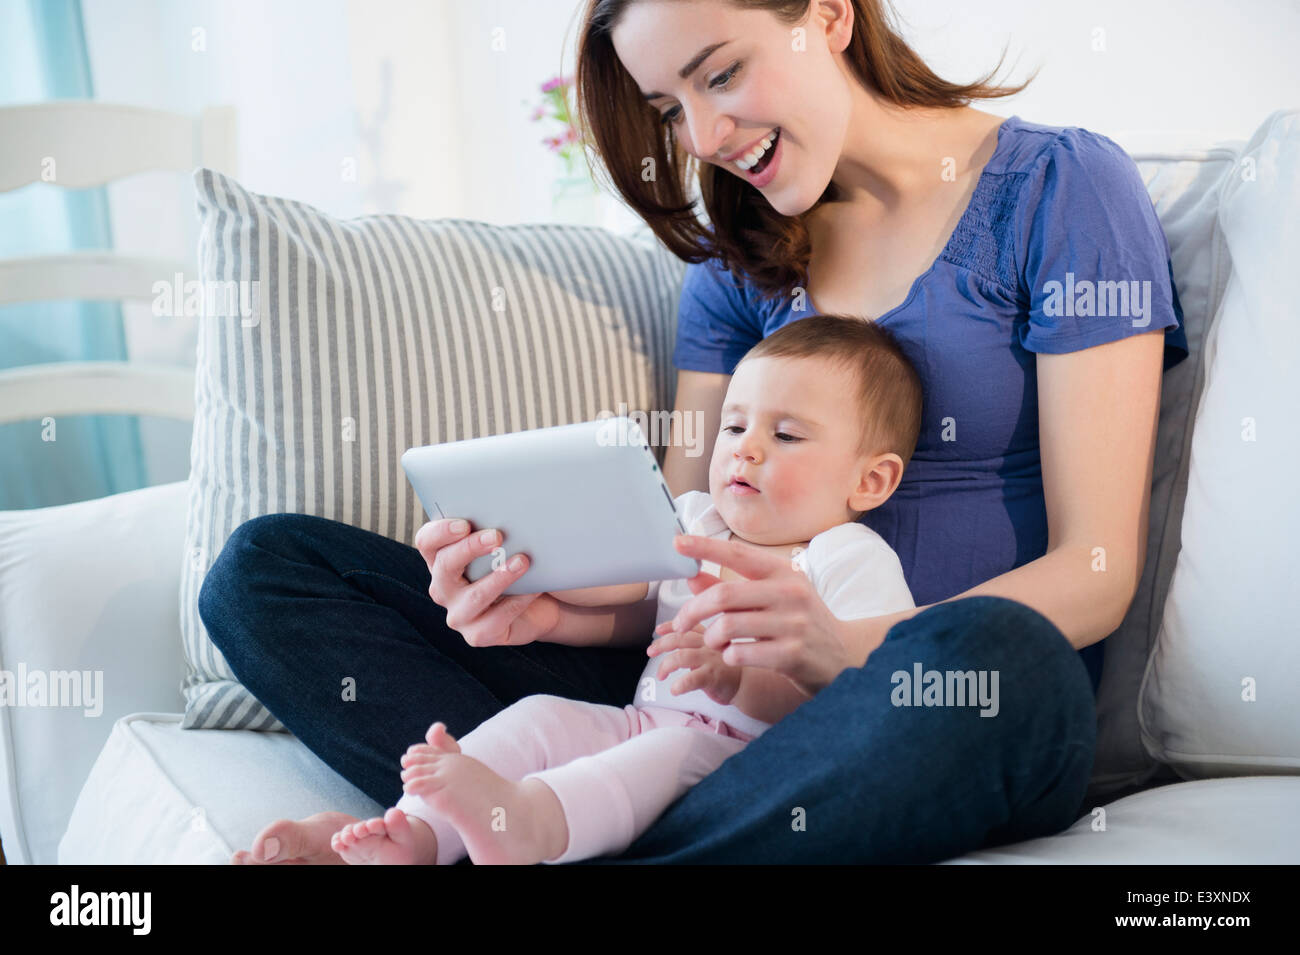 Mother and baby using digital tablet Stock Photo